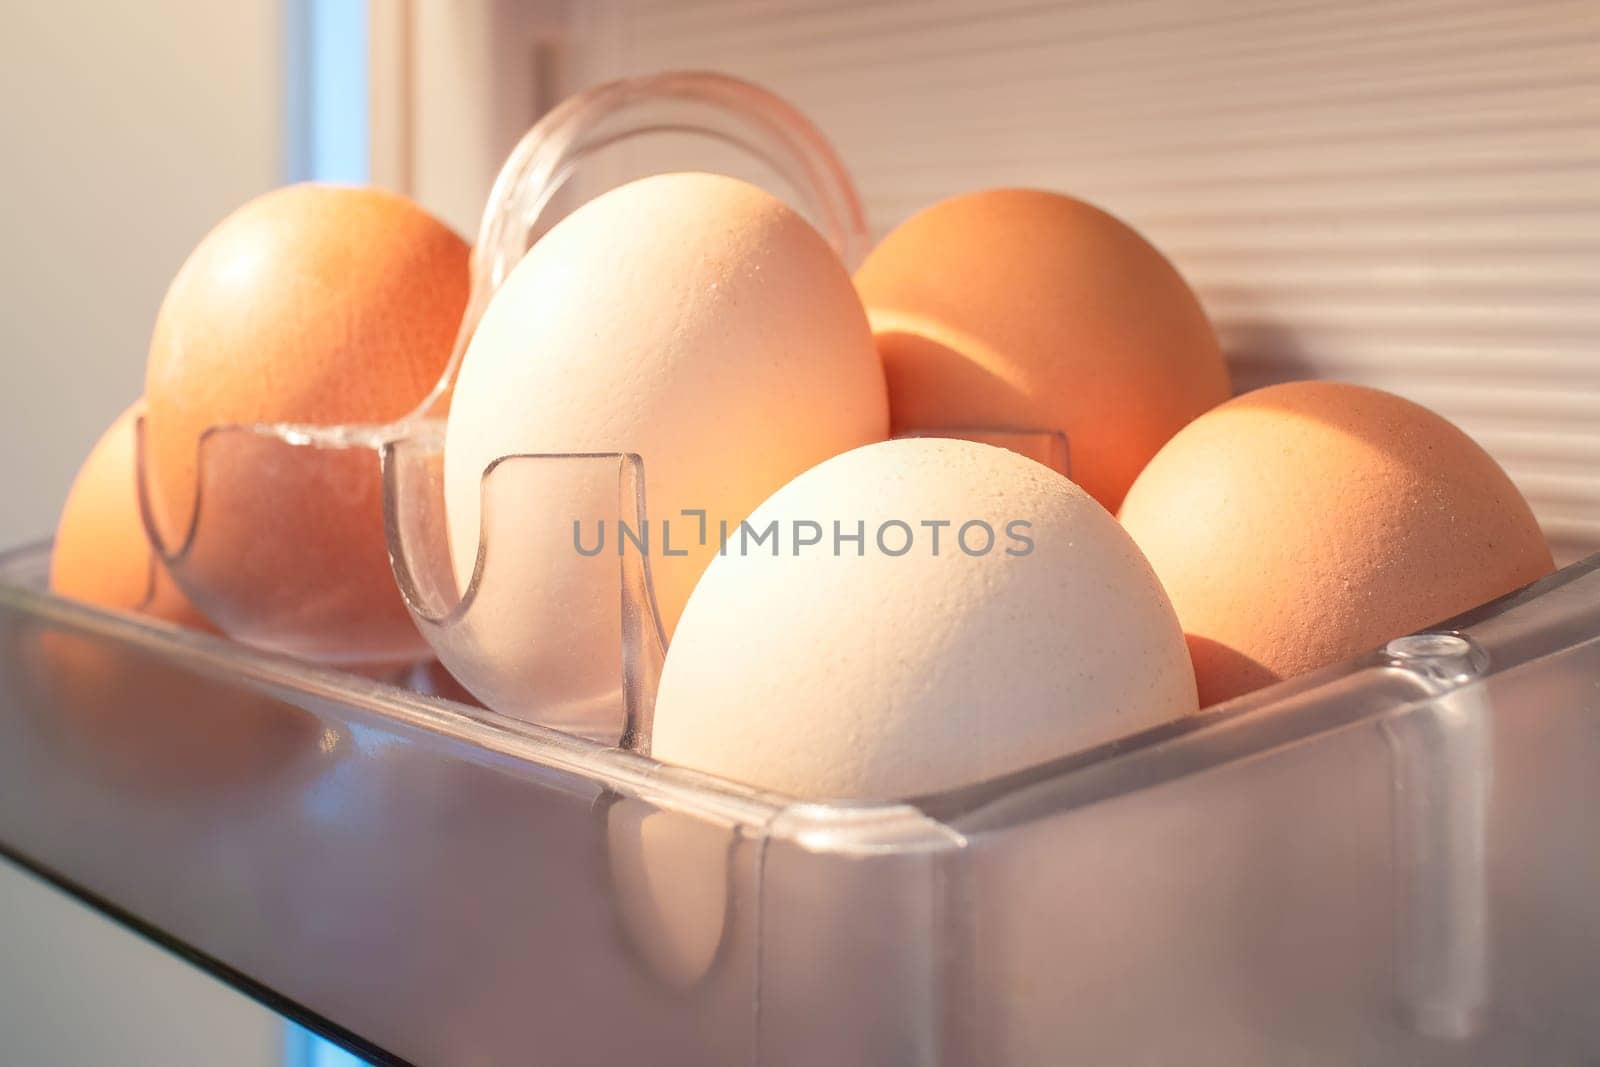 Organic eggs are stored in a transparent container inside a fridge, used as a key ingredient in various dishes, an oval staple food in different cuisines